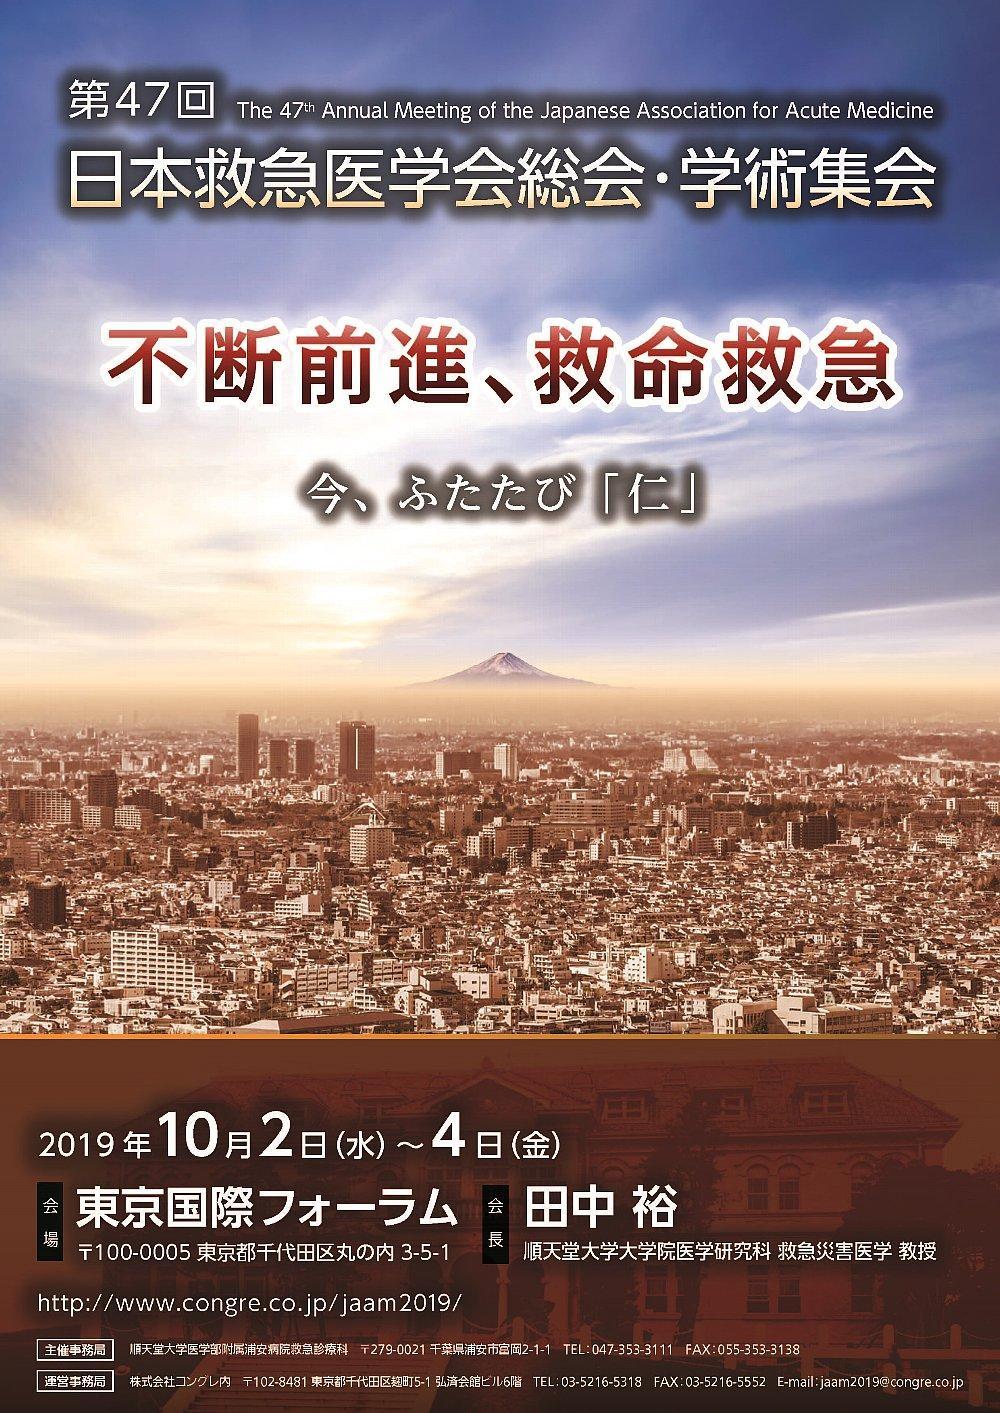 The 47th Annual Meeting of the Japanese Association for Acute Medicine